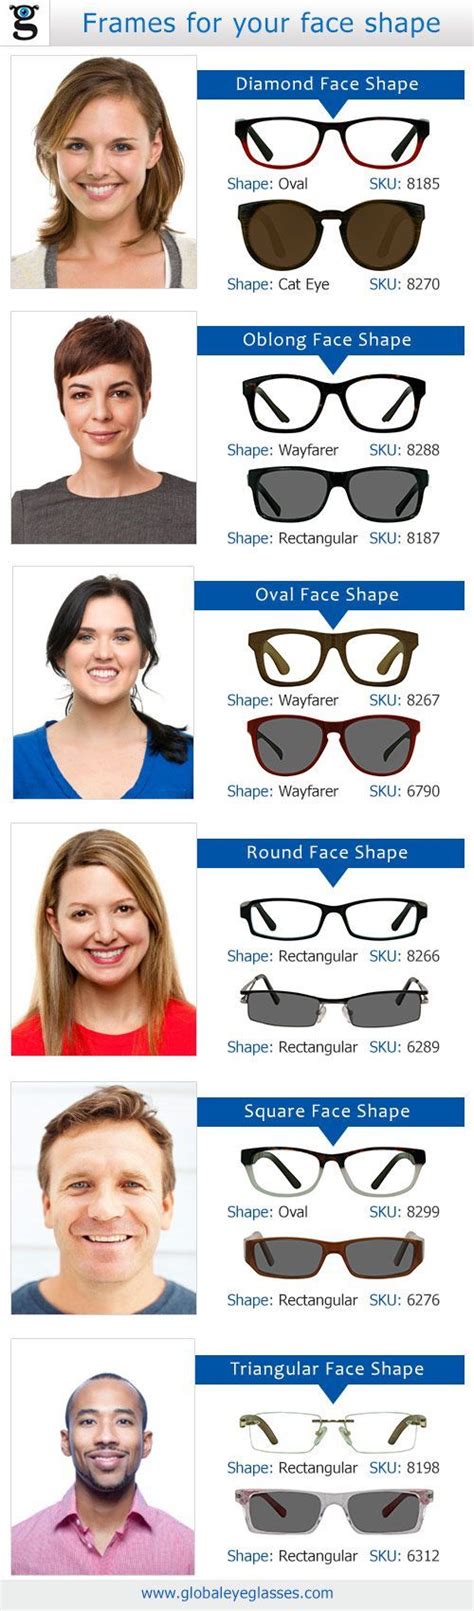 Choosing The Right Eyeglasses Based On Your Faceshape Infographic For